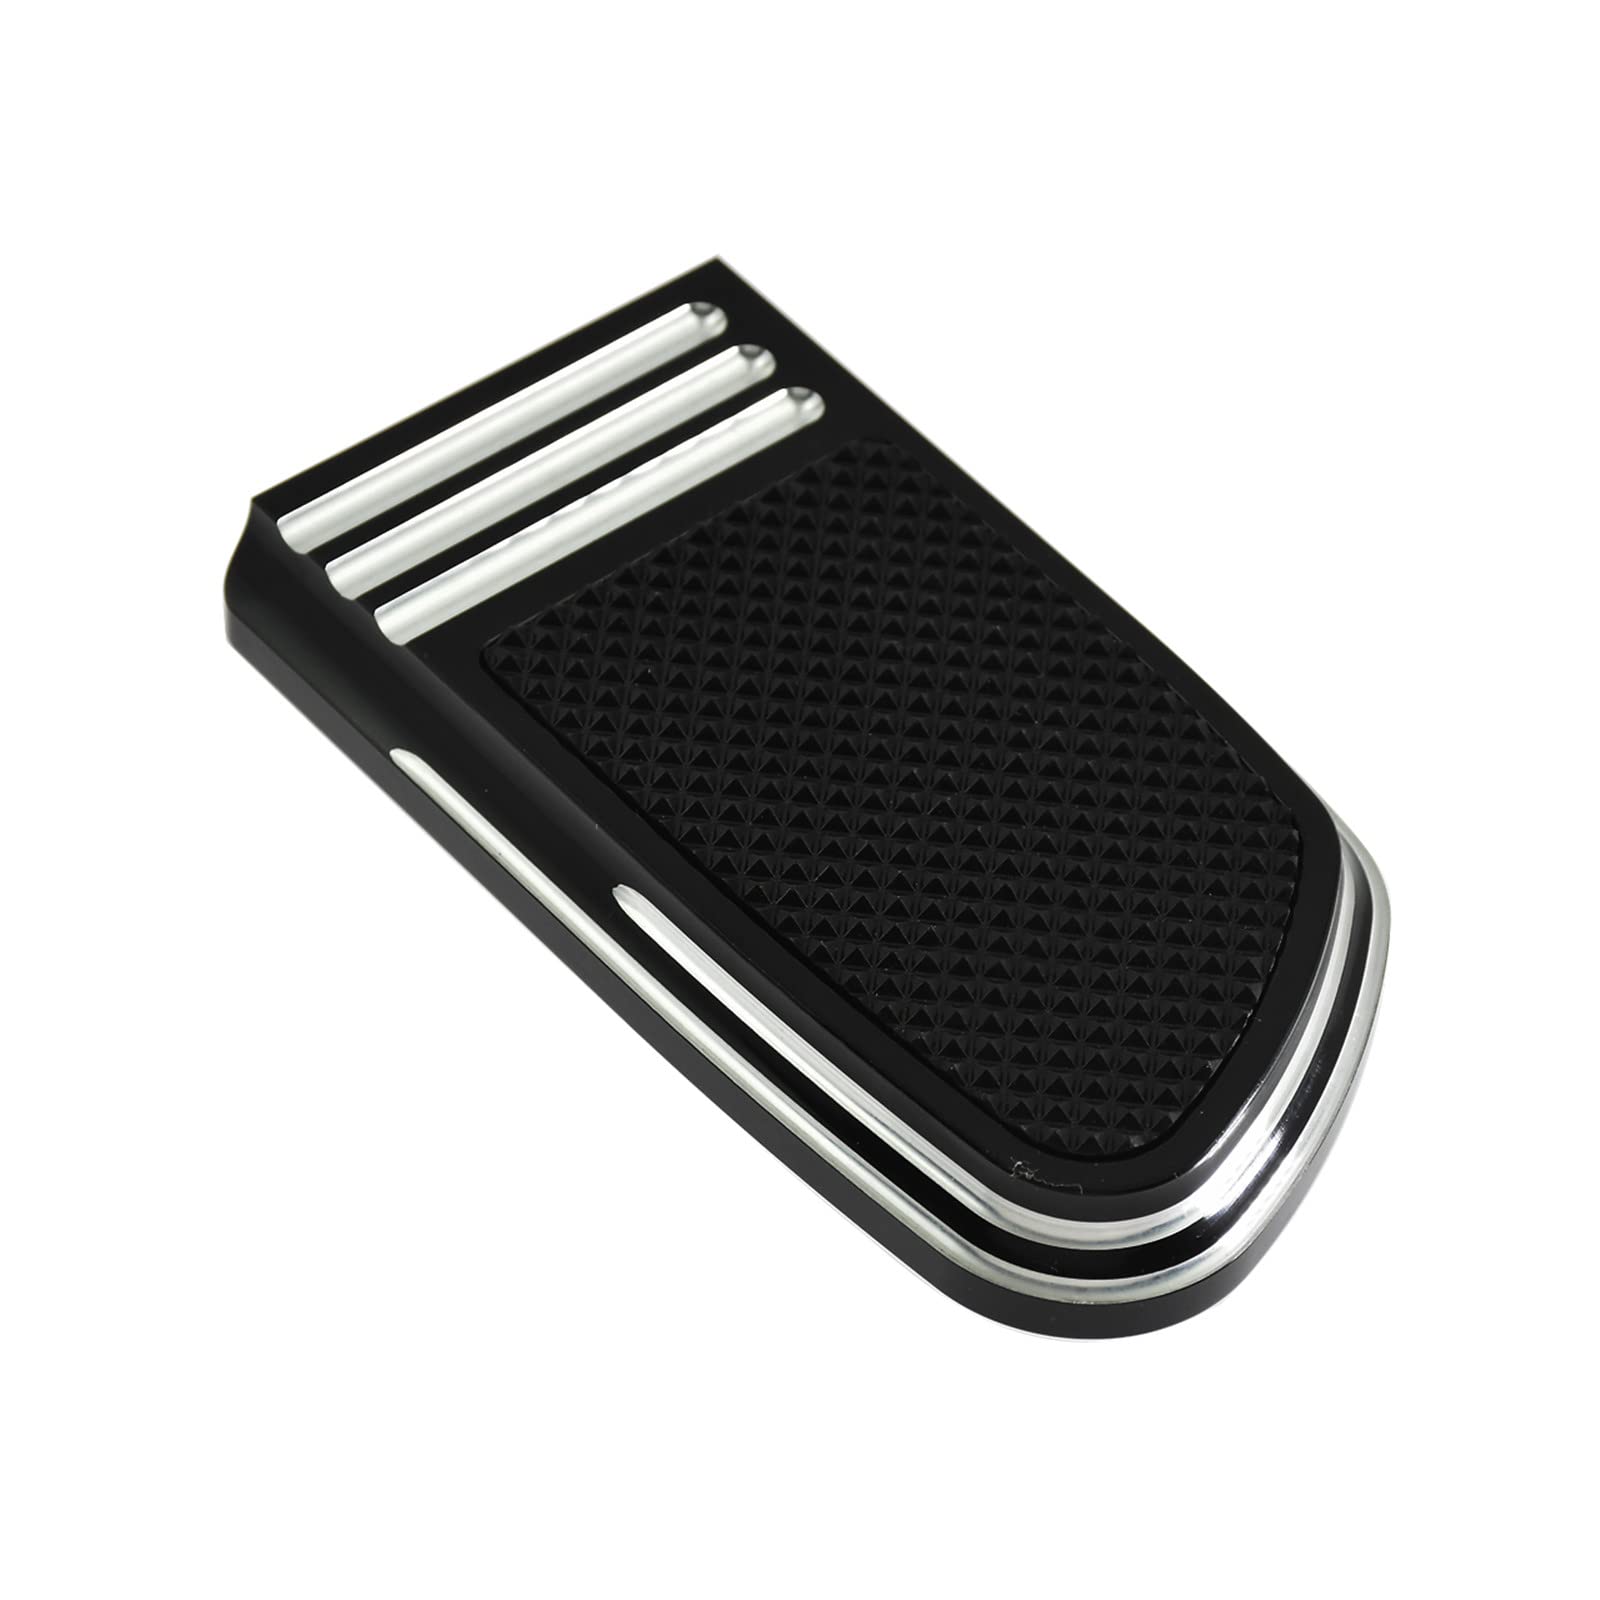 HDBUBALUS Rear Brake Pedal Large Pad Cover Fit for Harley Dyna Street Fat Boy Wide Glide Softail von HDBUBALUS